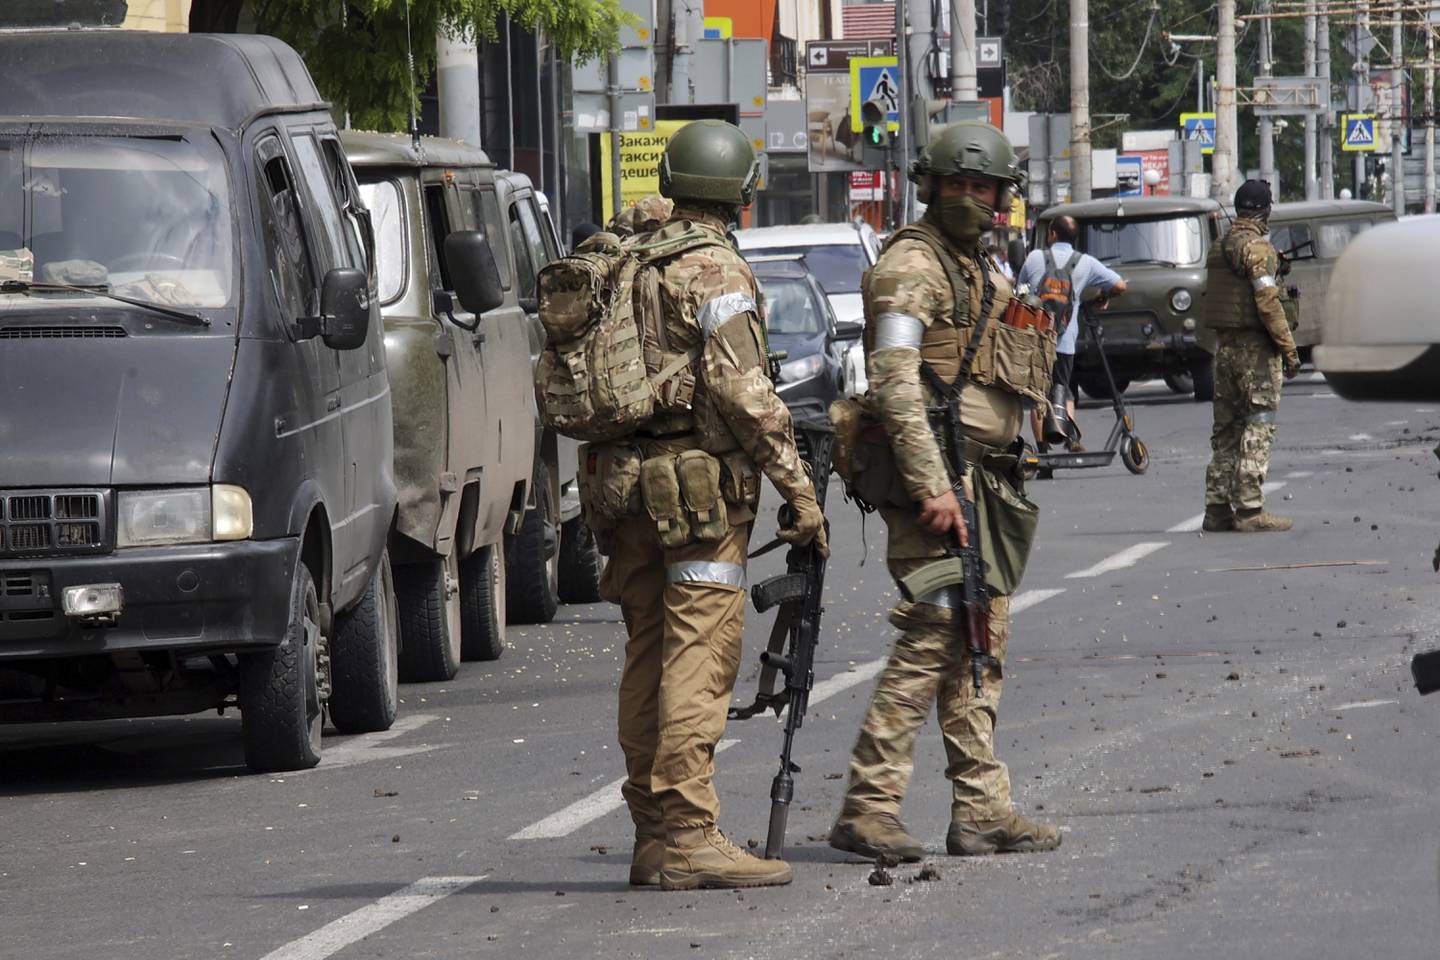 Russian servicemen guard an area in a street in Rostov-on-Don, Russia, Saturday, June 24, 2023. Russia's security services have responded to mercenary chief Yevgeny Prigozhin's declaration of an armed rebellion by calling for his arrest. In a sign of how seriously the Kremlin took the threat, security was heightened in Moscow, Rostov-on-Don and other regions. (Vasily Deryugin, Kommersant Publishing House via AP)